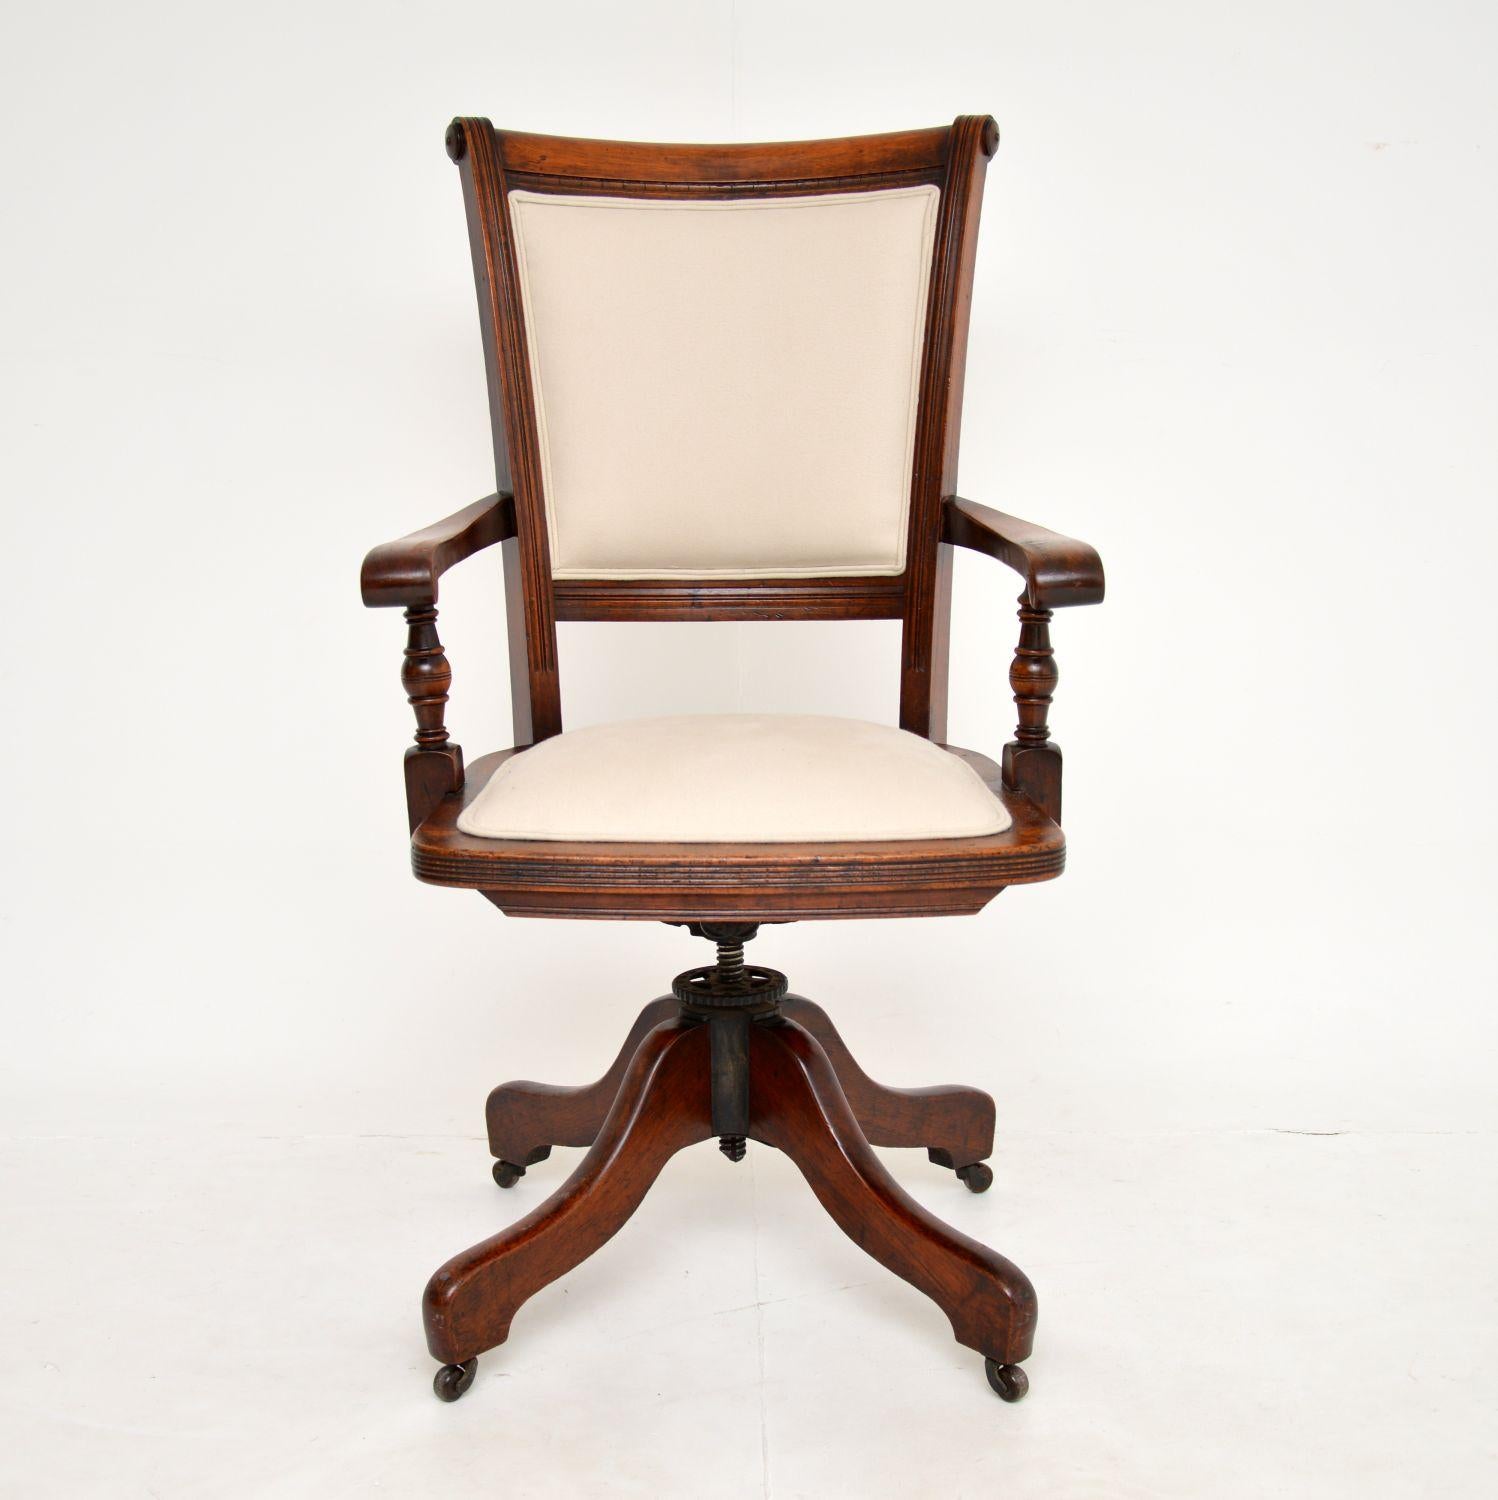 An excellent antique Victorian period swivel desk chair in wood. This was made in England, it dates from around 1880-1900 period.

This is very well made and is very comfortable. It swivels smoothly, rolls on casters and tilts, the height is also